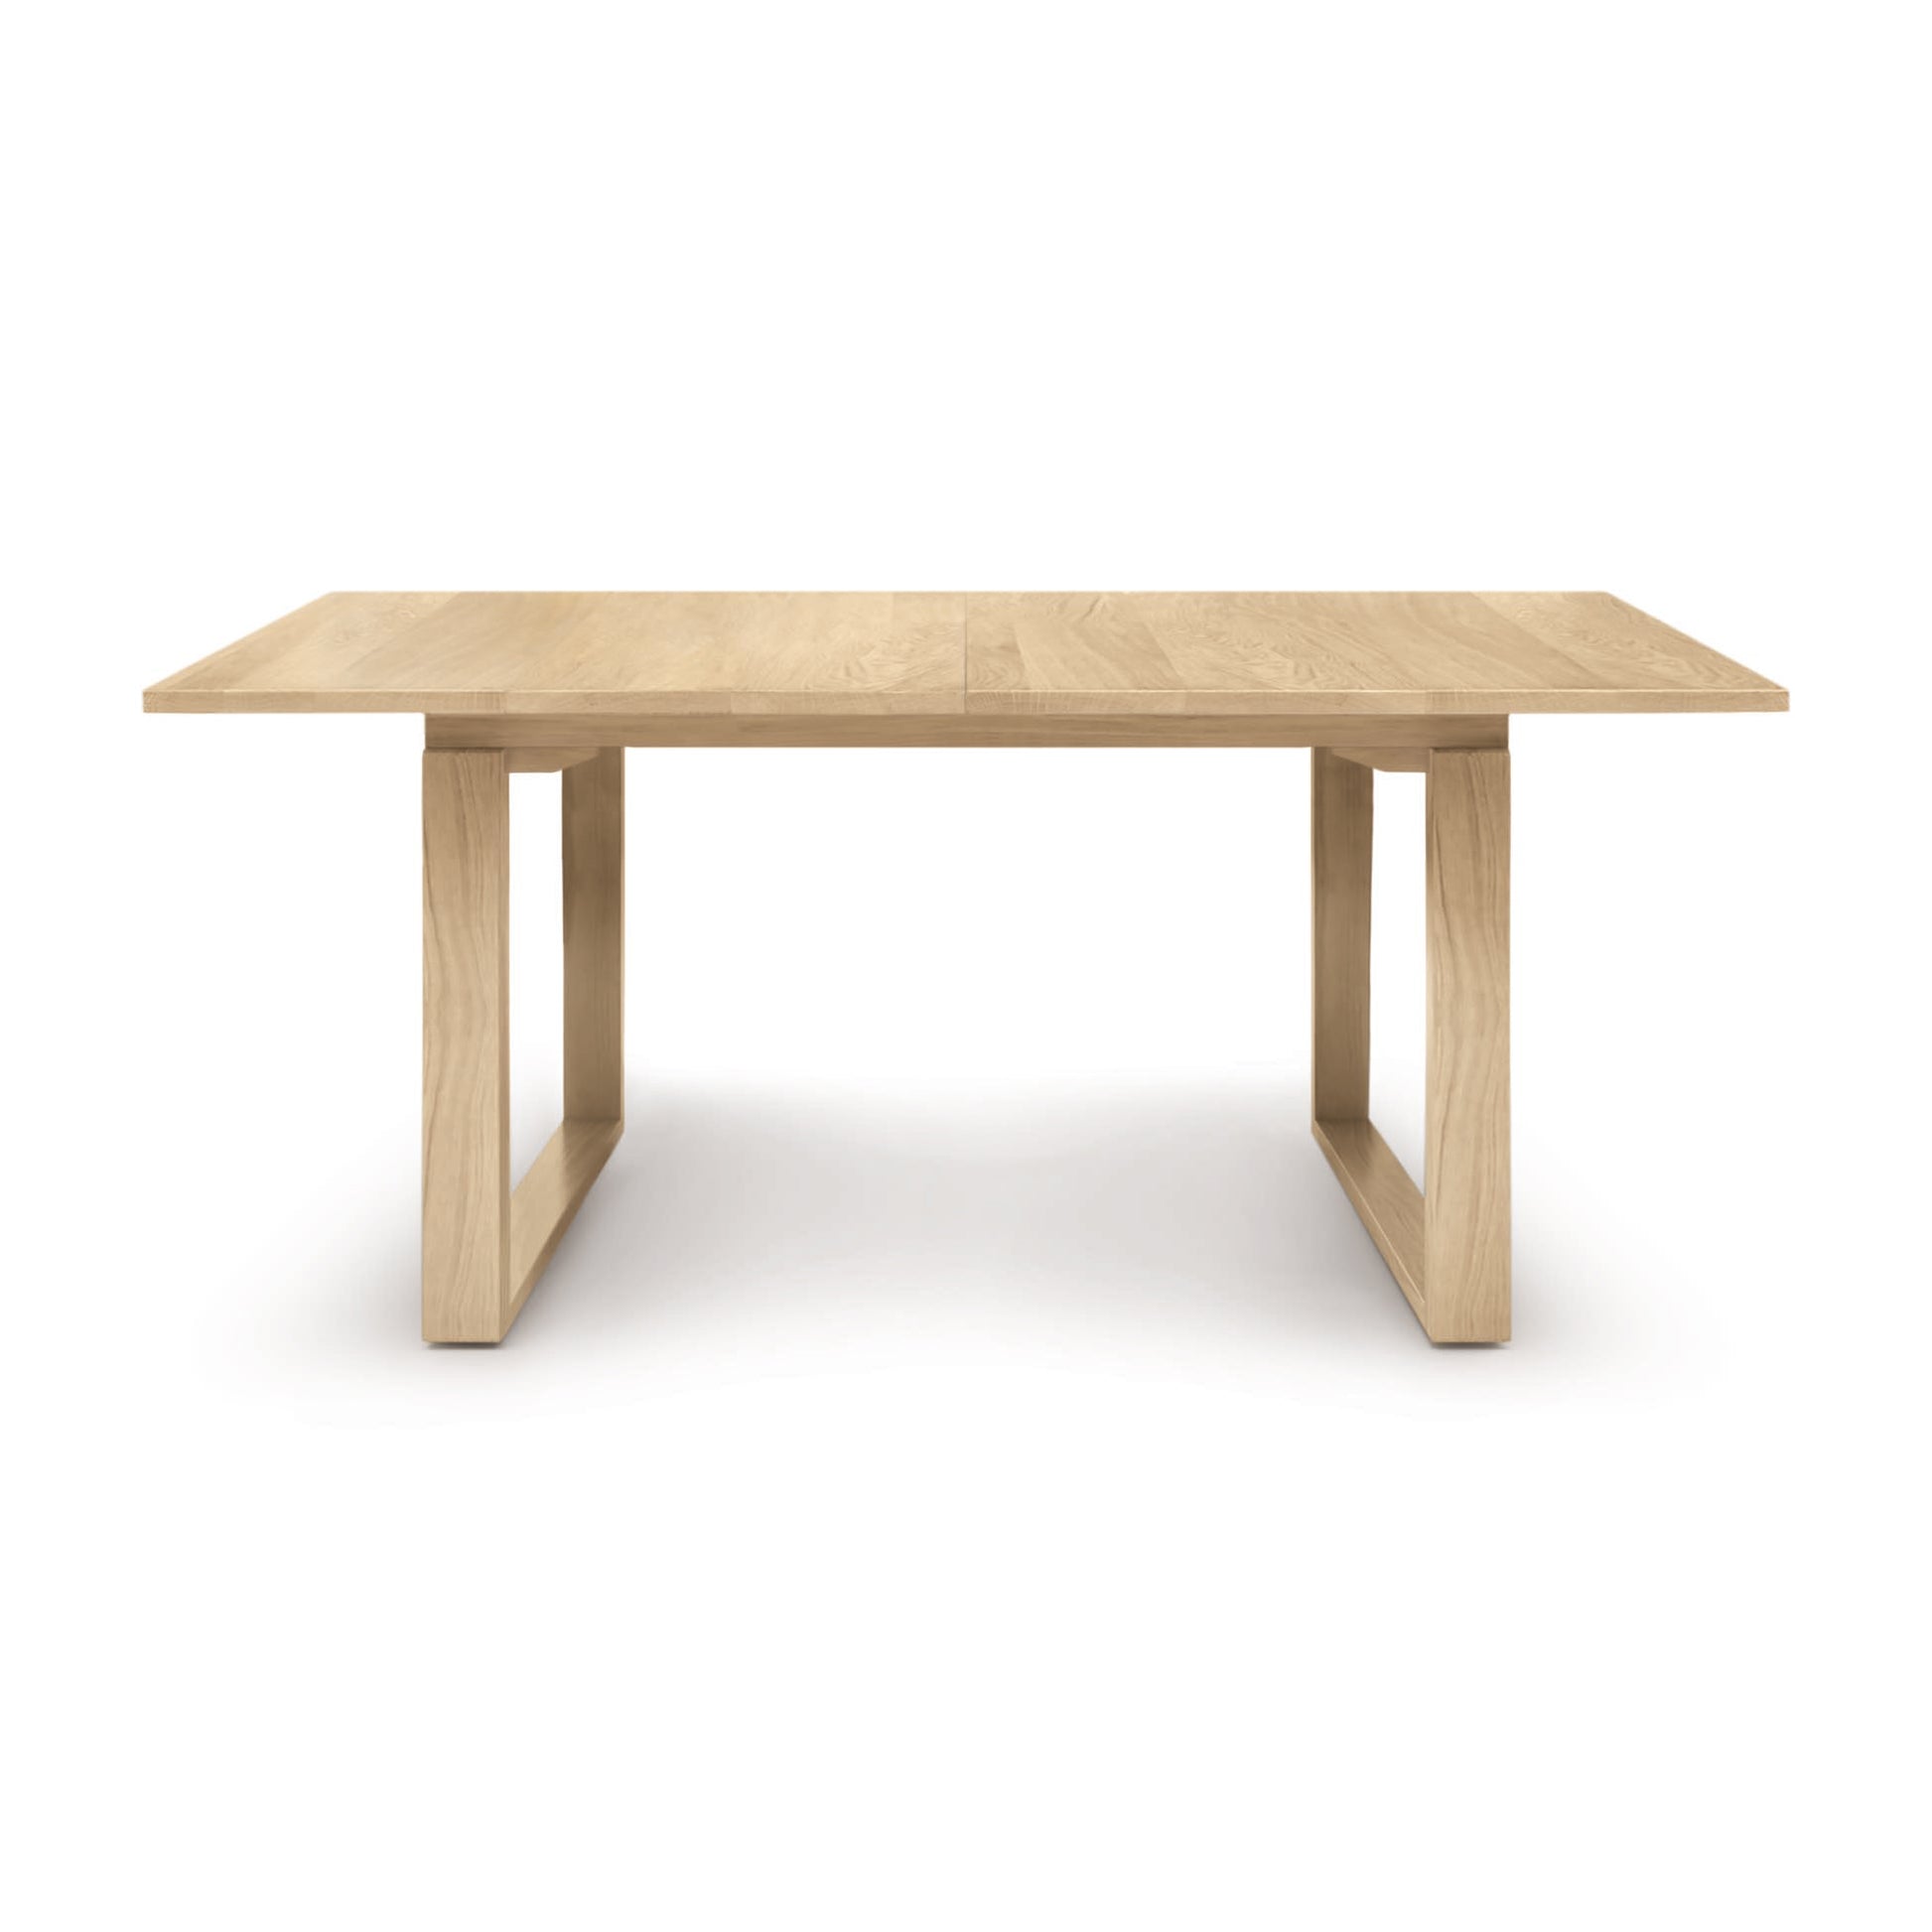 A Iso Extension Dining Table with a wooden base by Copeland Furniture.